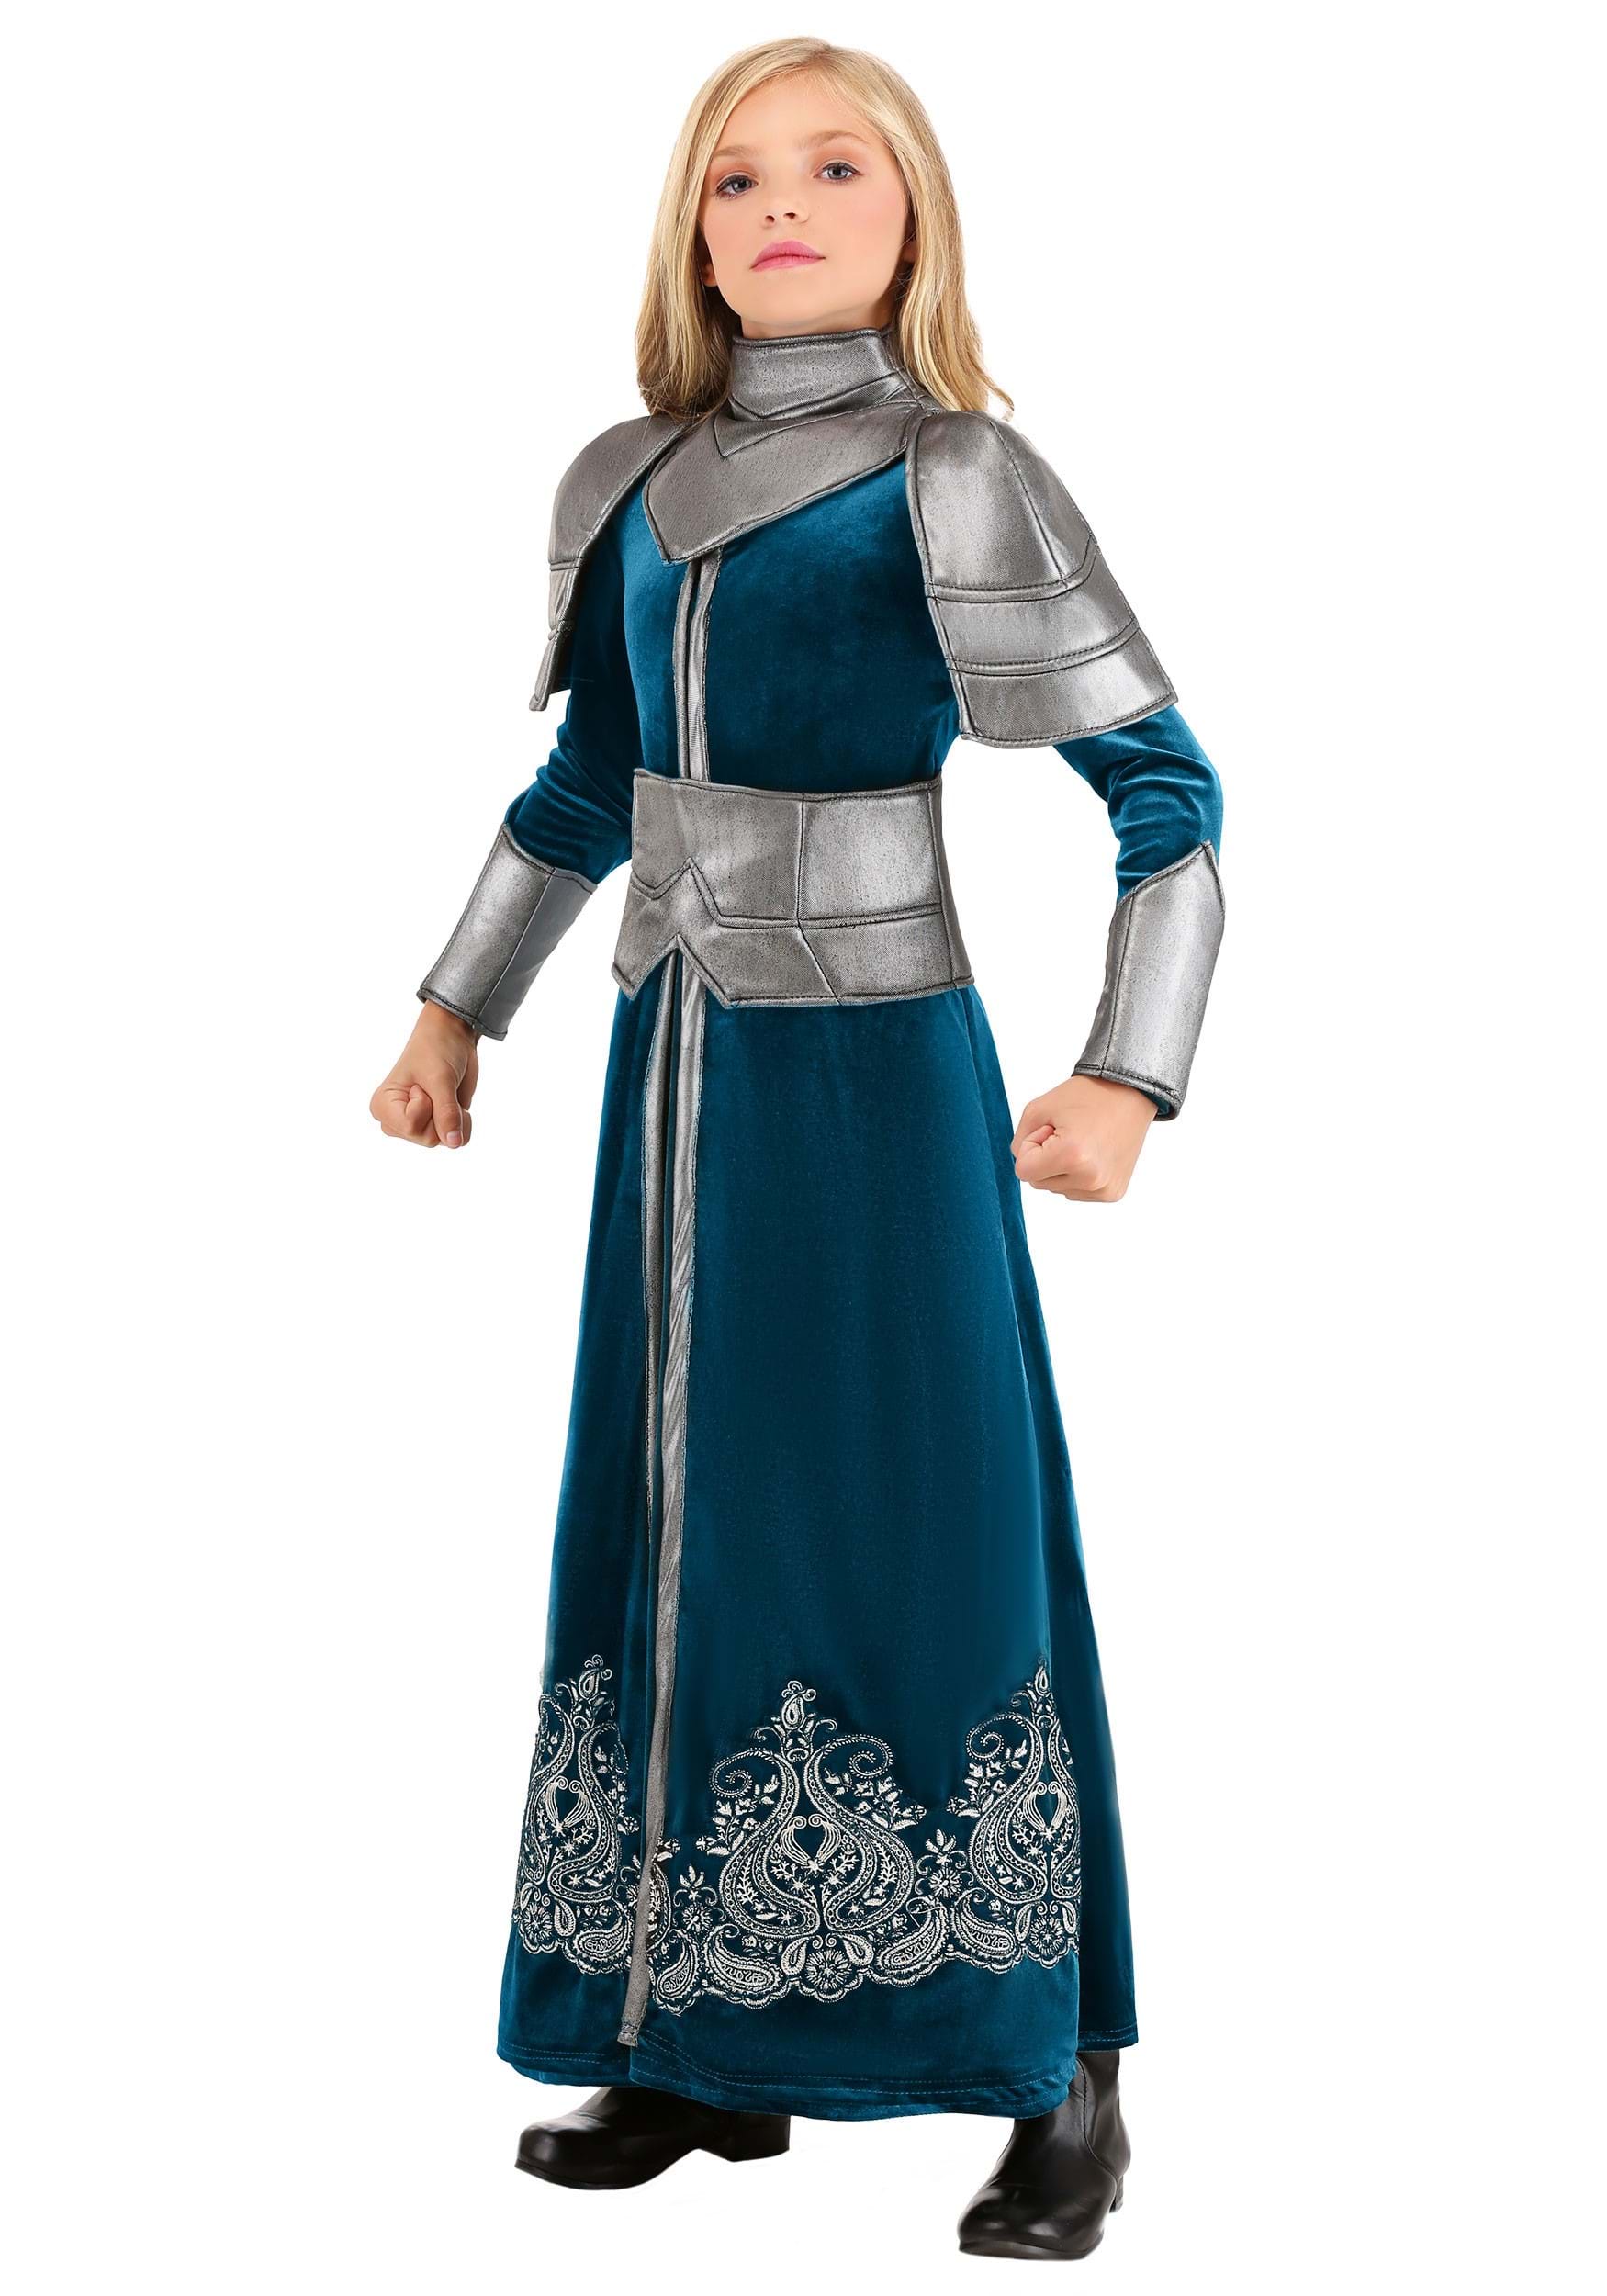 Photos - Fancy Dress Warrior FUN Costumes Medieval Knight Costume Dress for Girls | Historical Costumes 